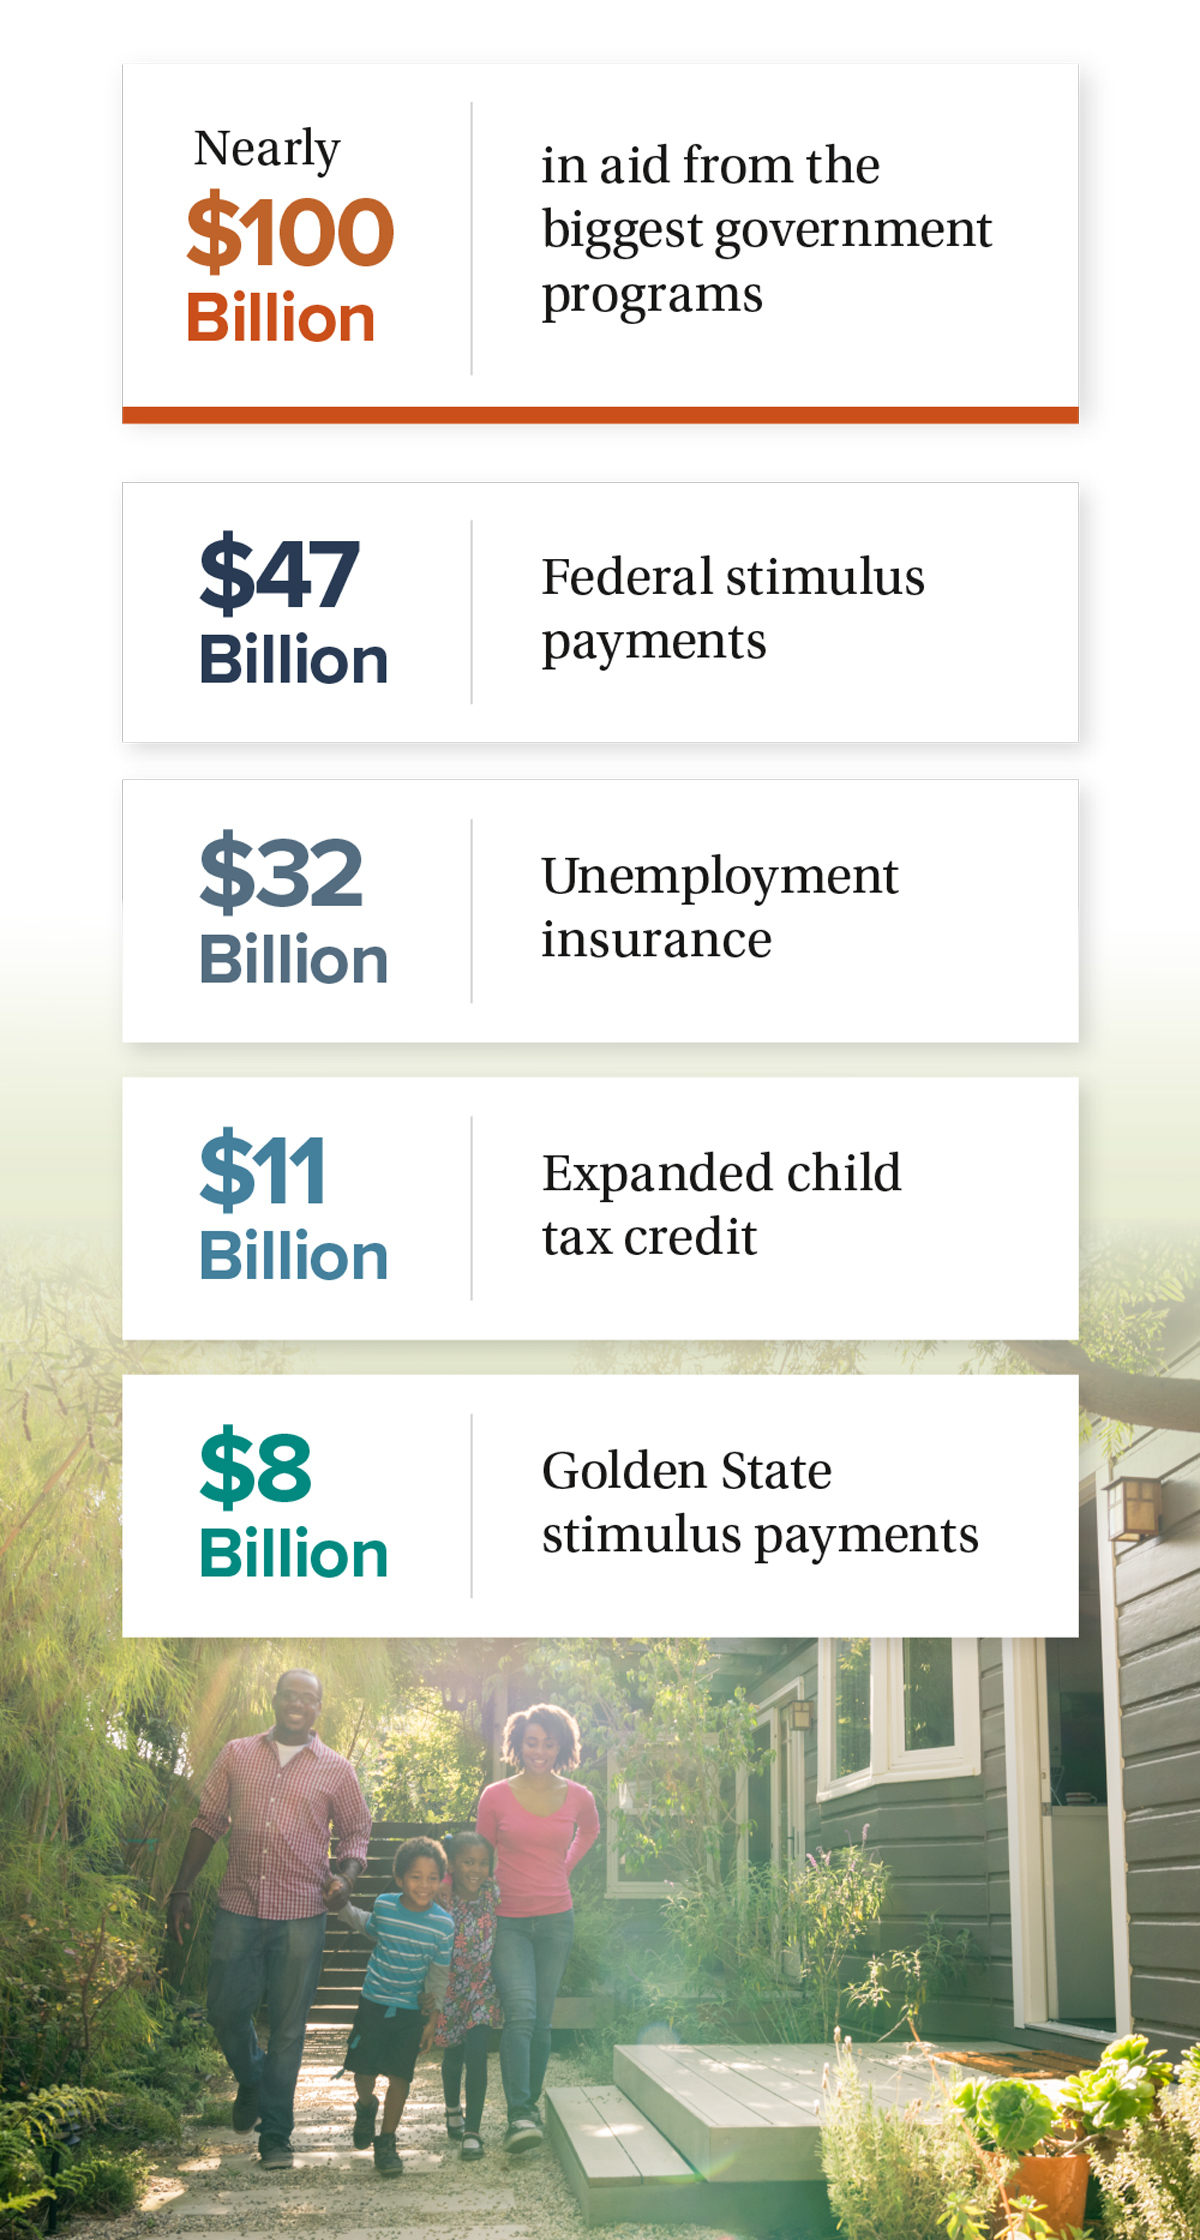 infographic - Pandemic aid to California families totaled nearly $100 billion